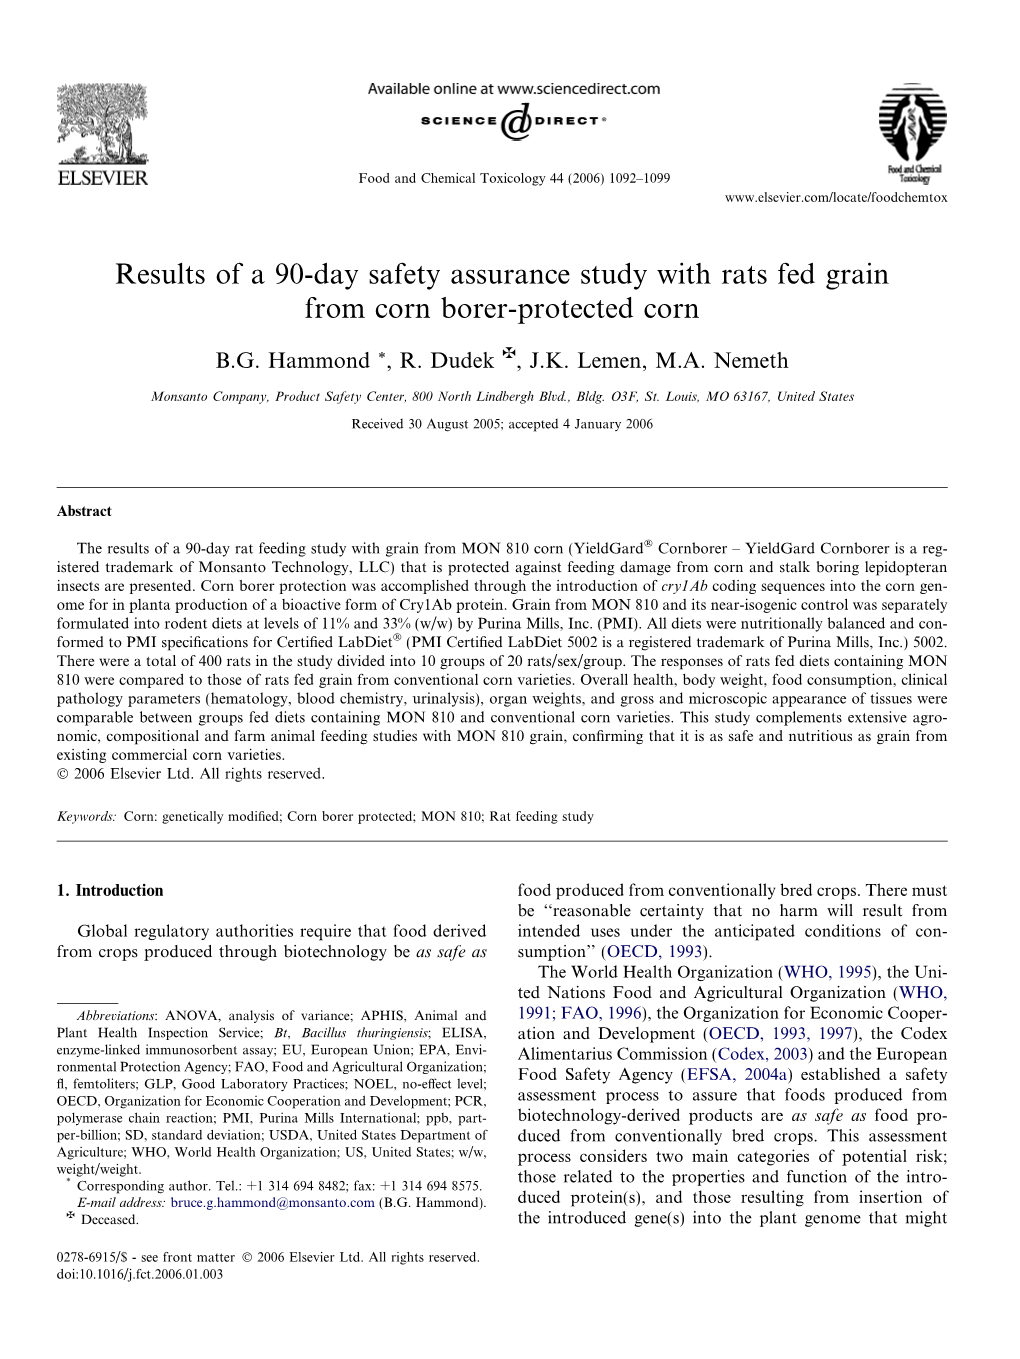 Results of a 90-Day Safety Assurance Study with Rats Fed Grain from Corn Borer-Protected Corn